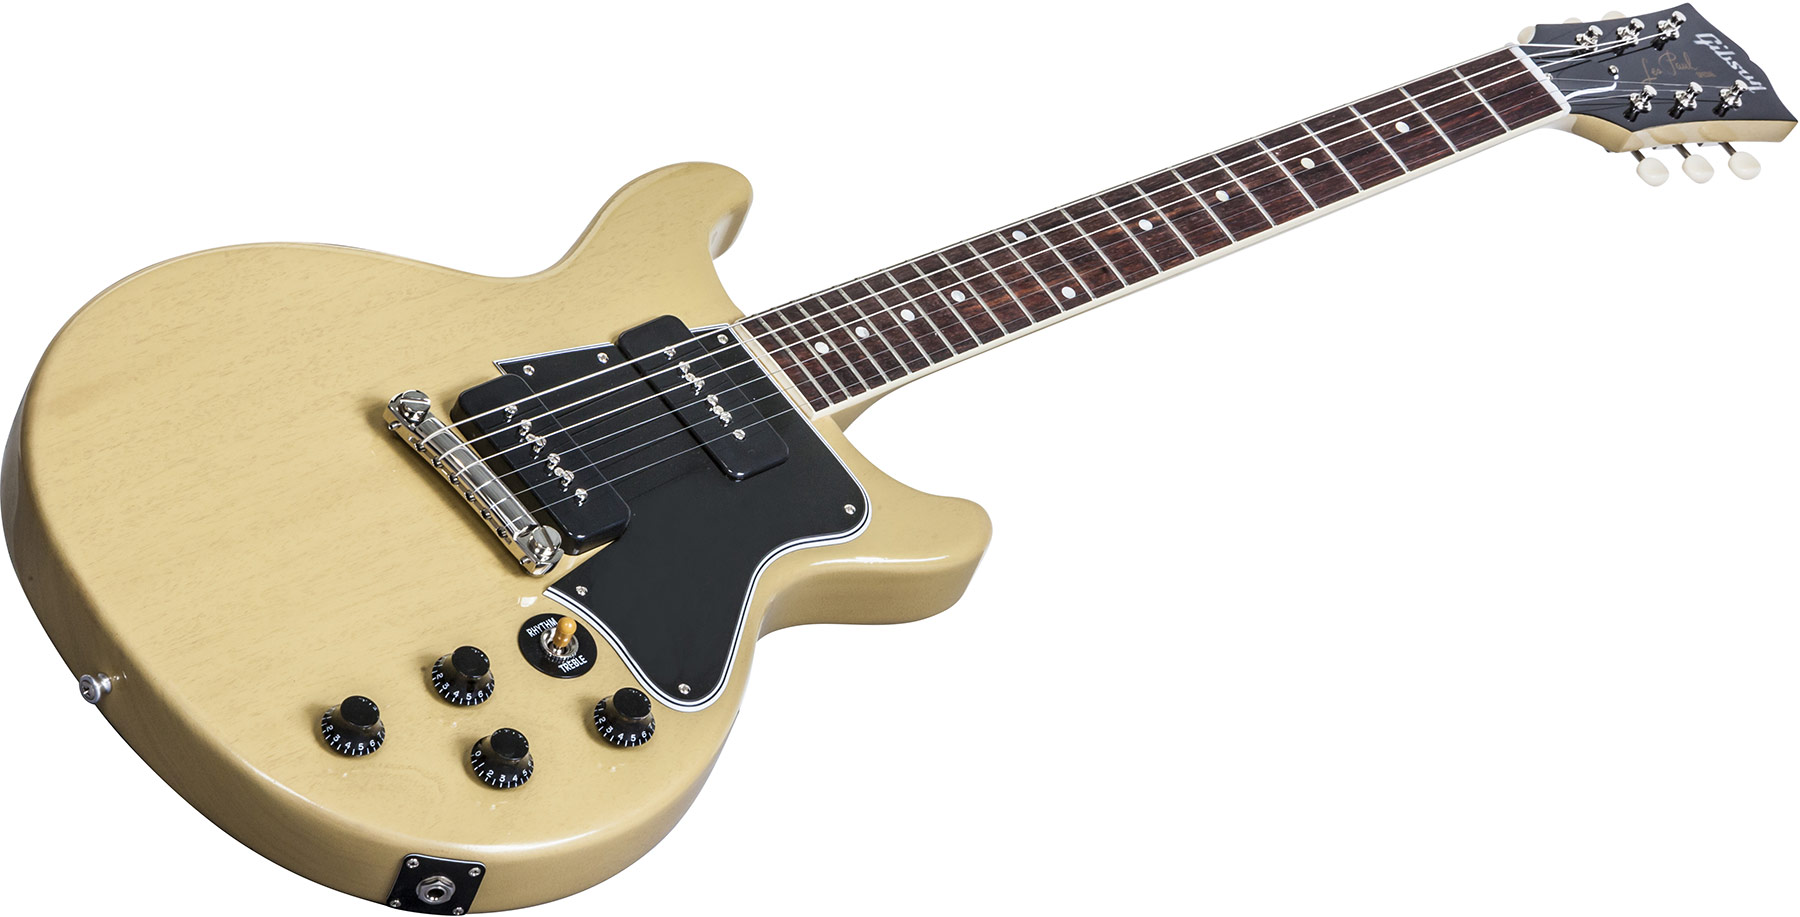 Gibson Custom Shop Les Paul Special Double Cut 2p90 Ht Rw - Tv Yellow - Double cut electric guitar - Variation 3